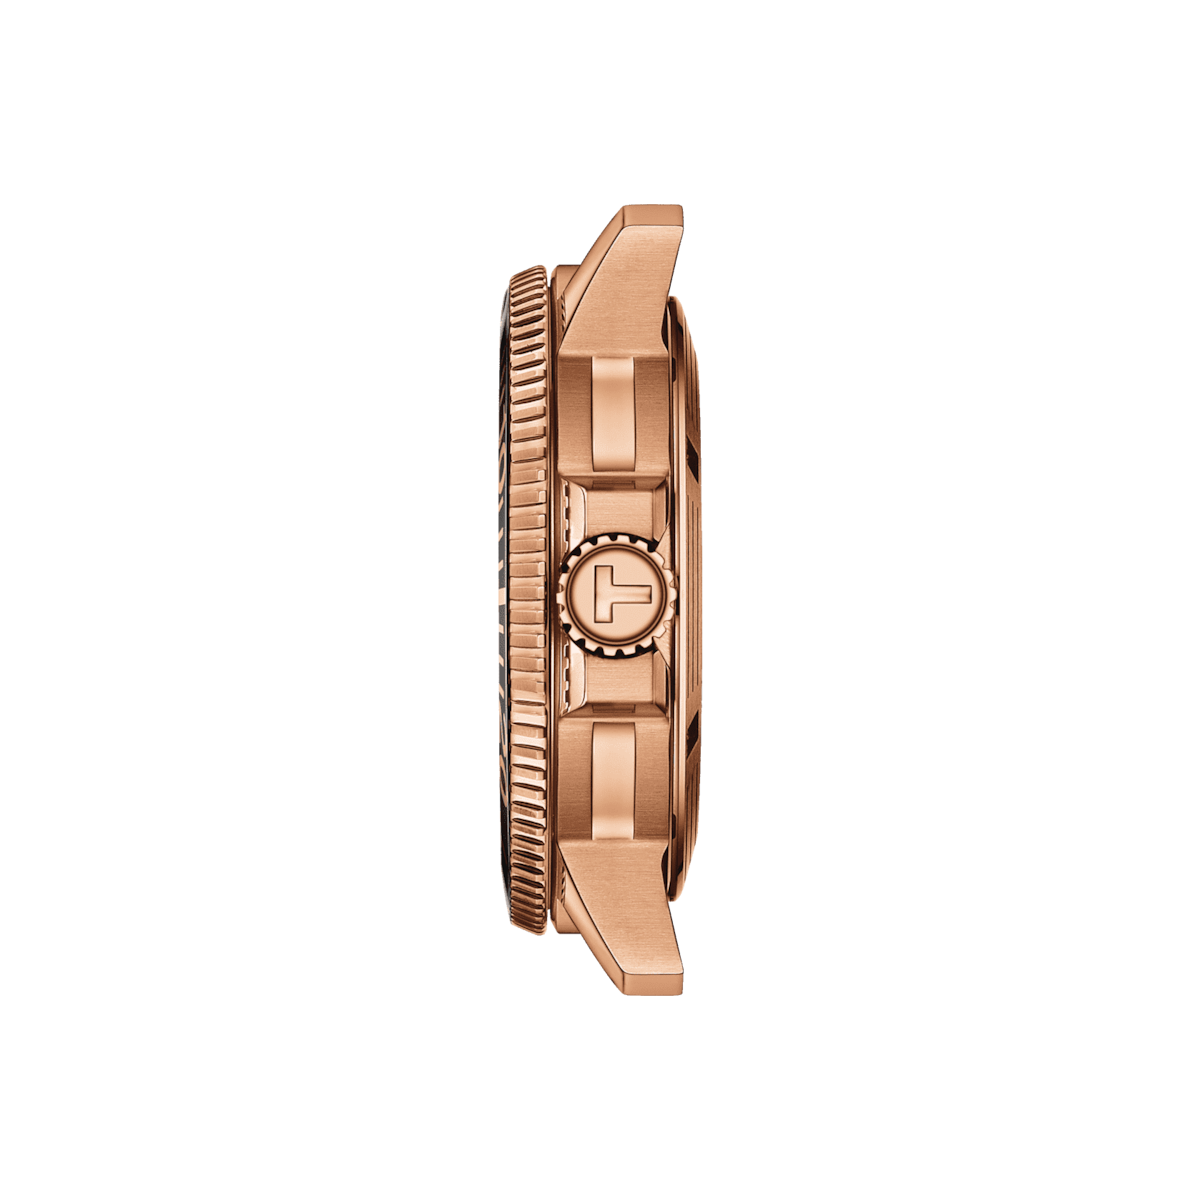 T-Sport Seastar 1000 Powermatic 80 Stainless Steel Case with Rose Gold 